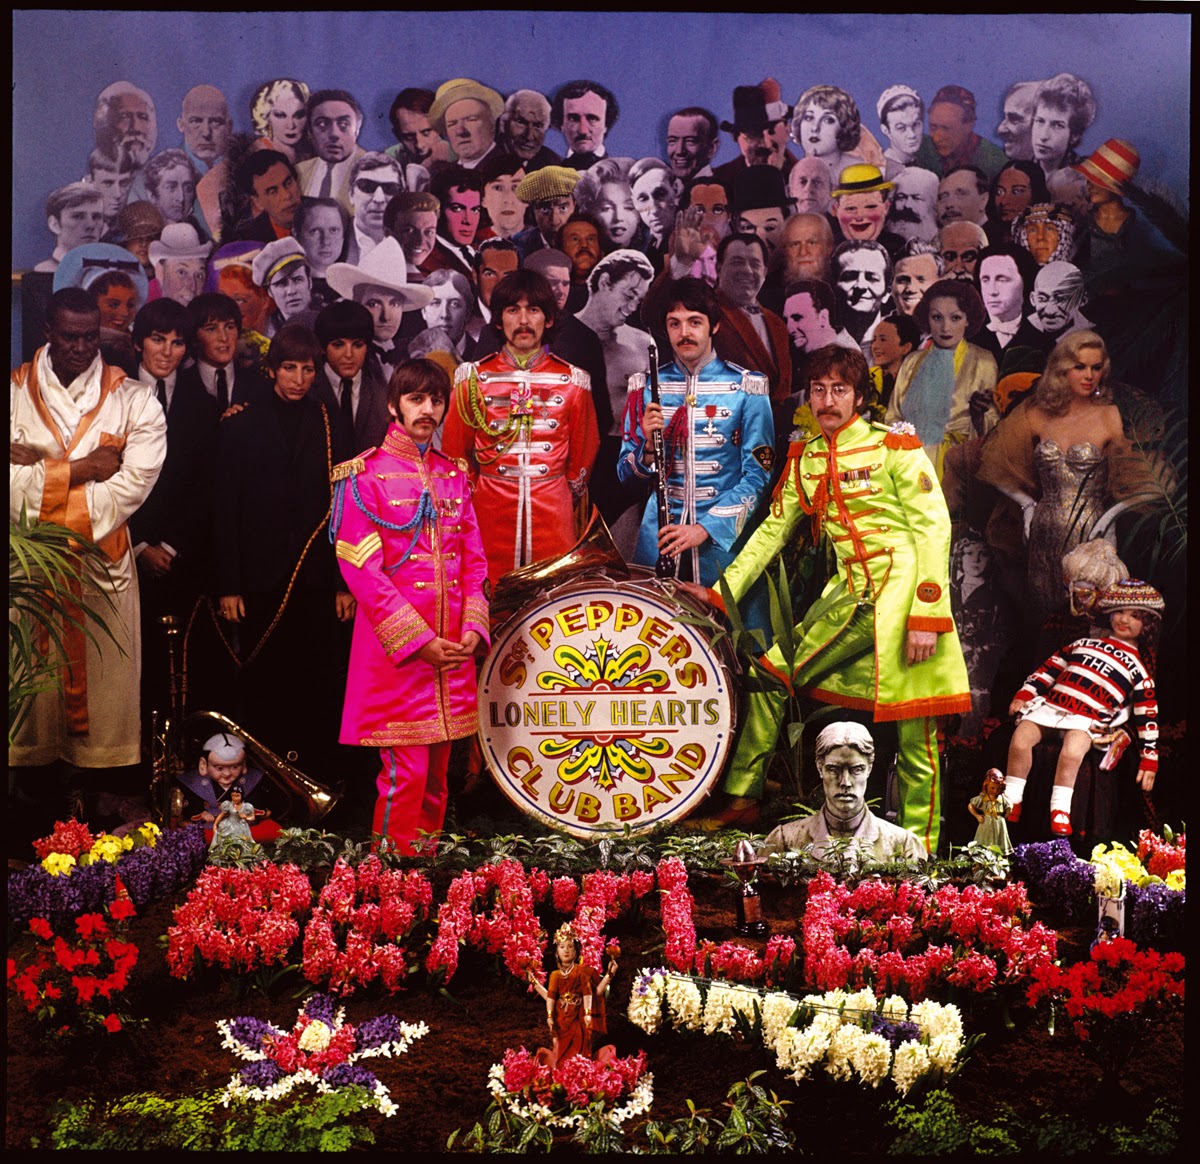 The Daily Beatle has moved!: Album covers: Pepper